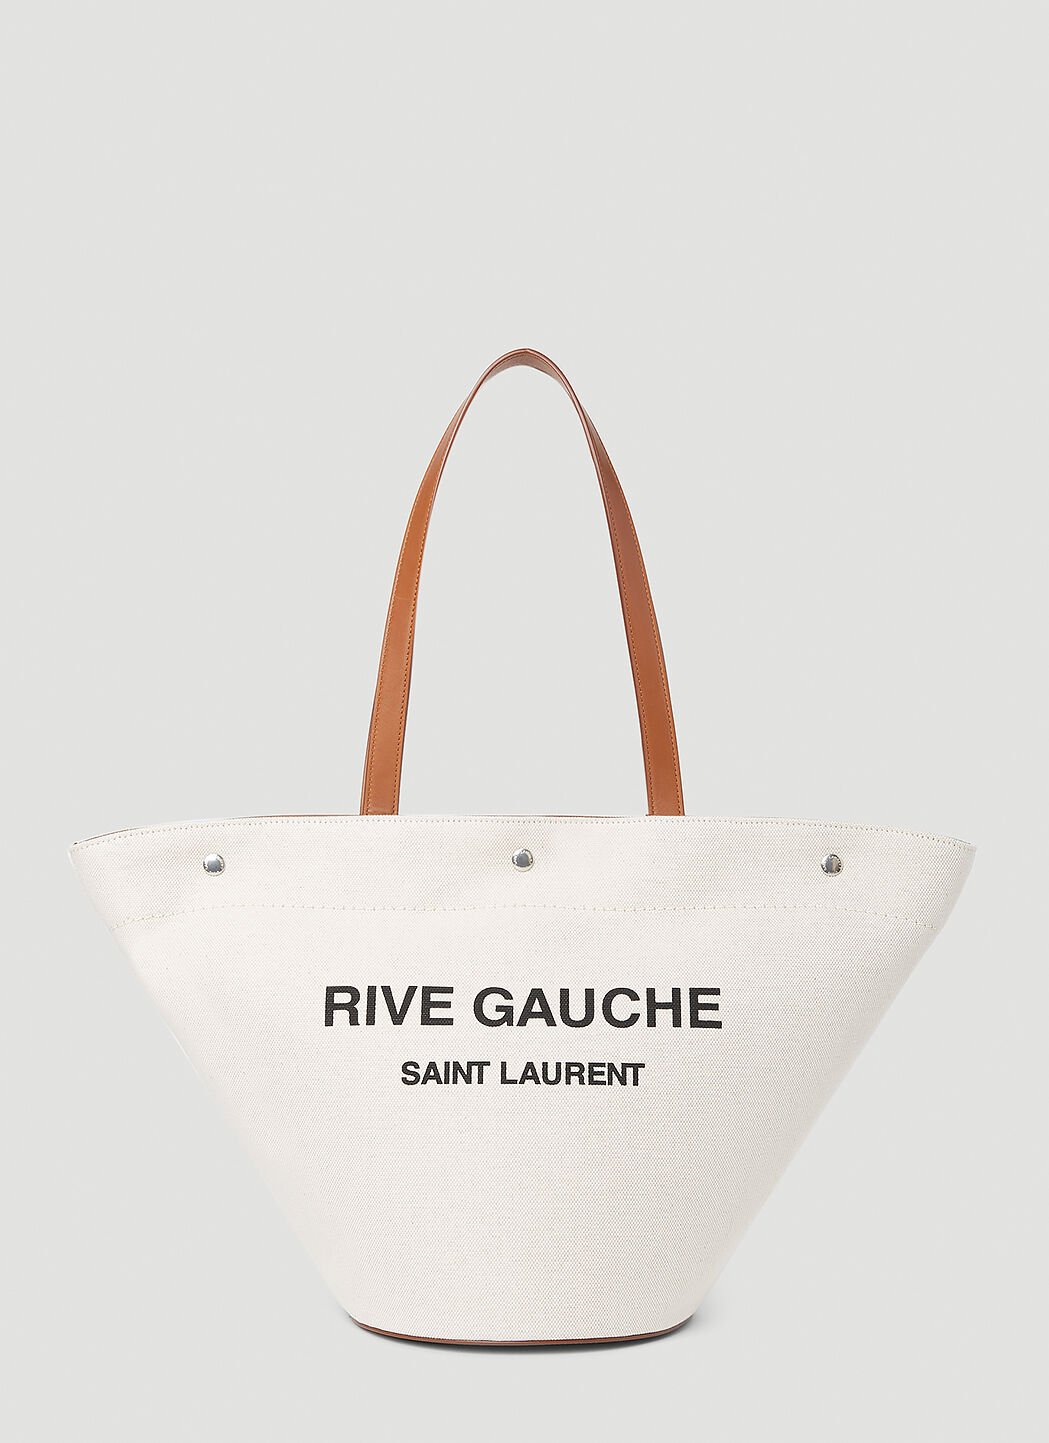 Gallery Dept. Rive Gauche Tote Bag Olive gdp0150042